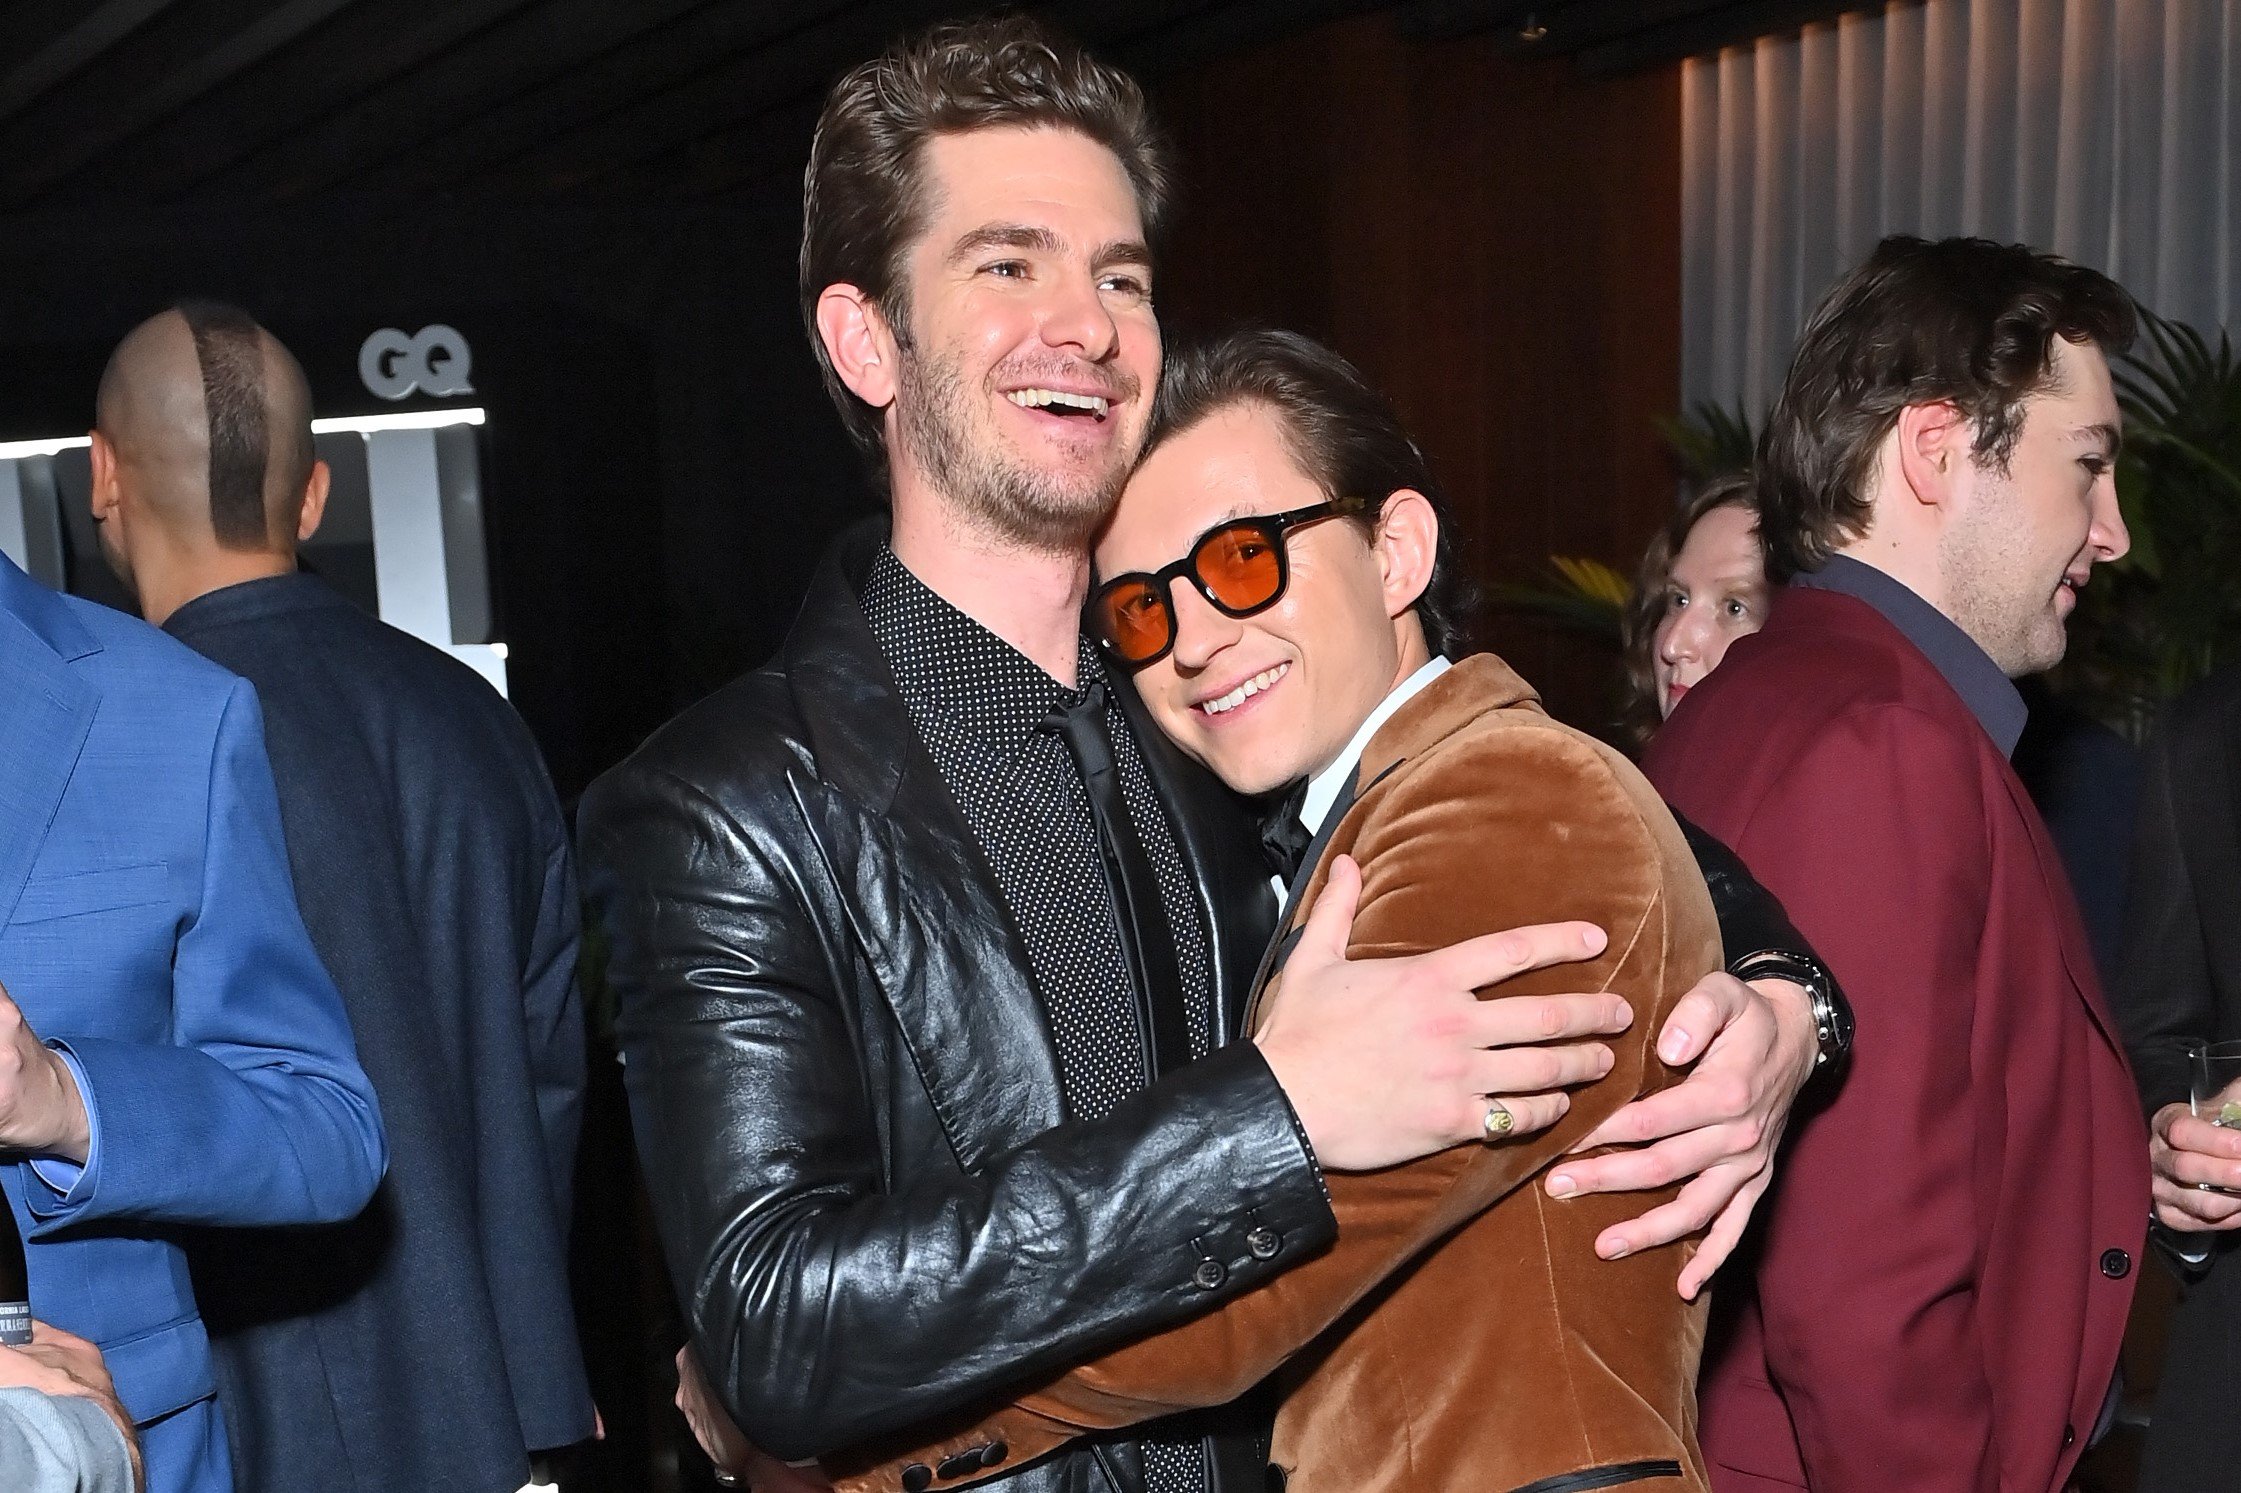 'Spider-Man: No Way Home' stars Andrew Garfield and Tom Holland embrace. Garfield wears a black leather jacket over a black and white polka dotted button-up shirt and black tie. Holland wears a brown velvet blazer over a white button-up shirt and orange-tinted glasses.